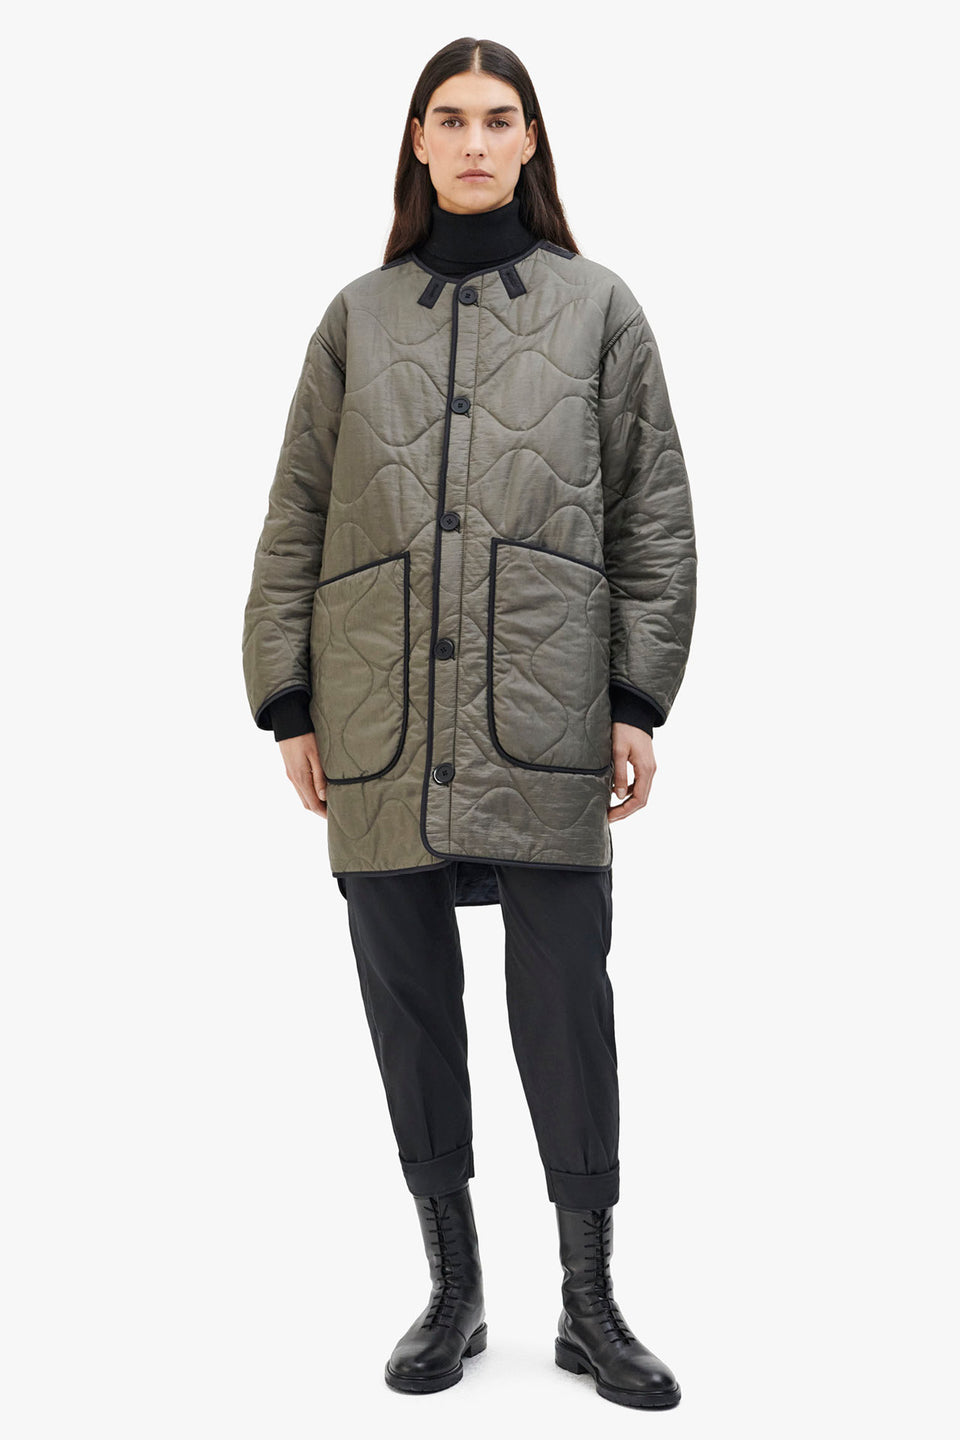 Signature Quilt Jacket - Navy / Dark Olive (listing page thumbnail)